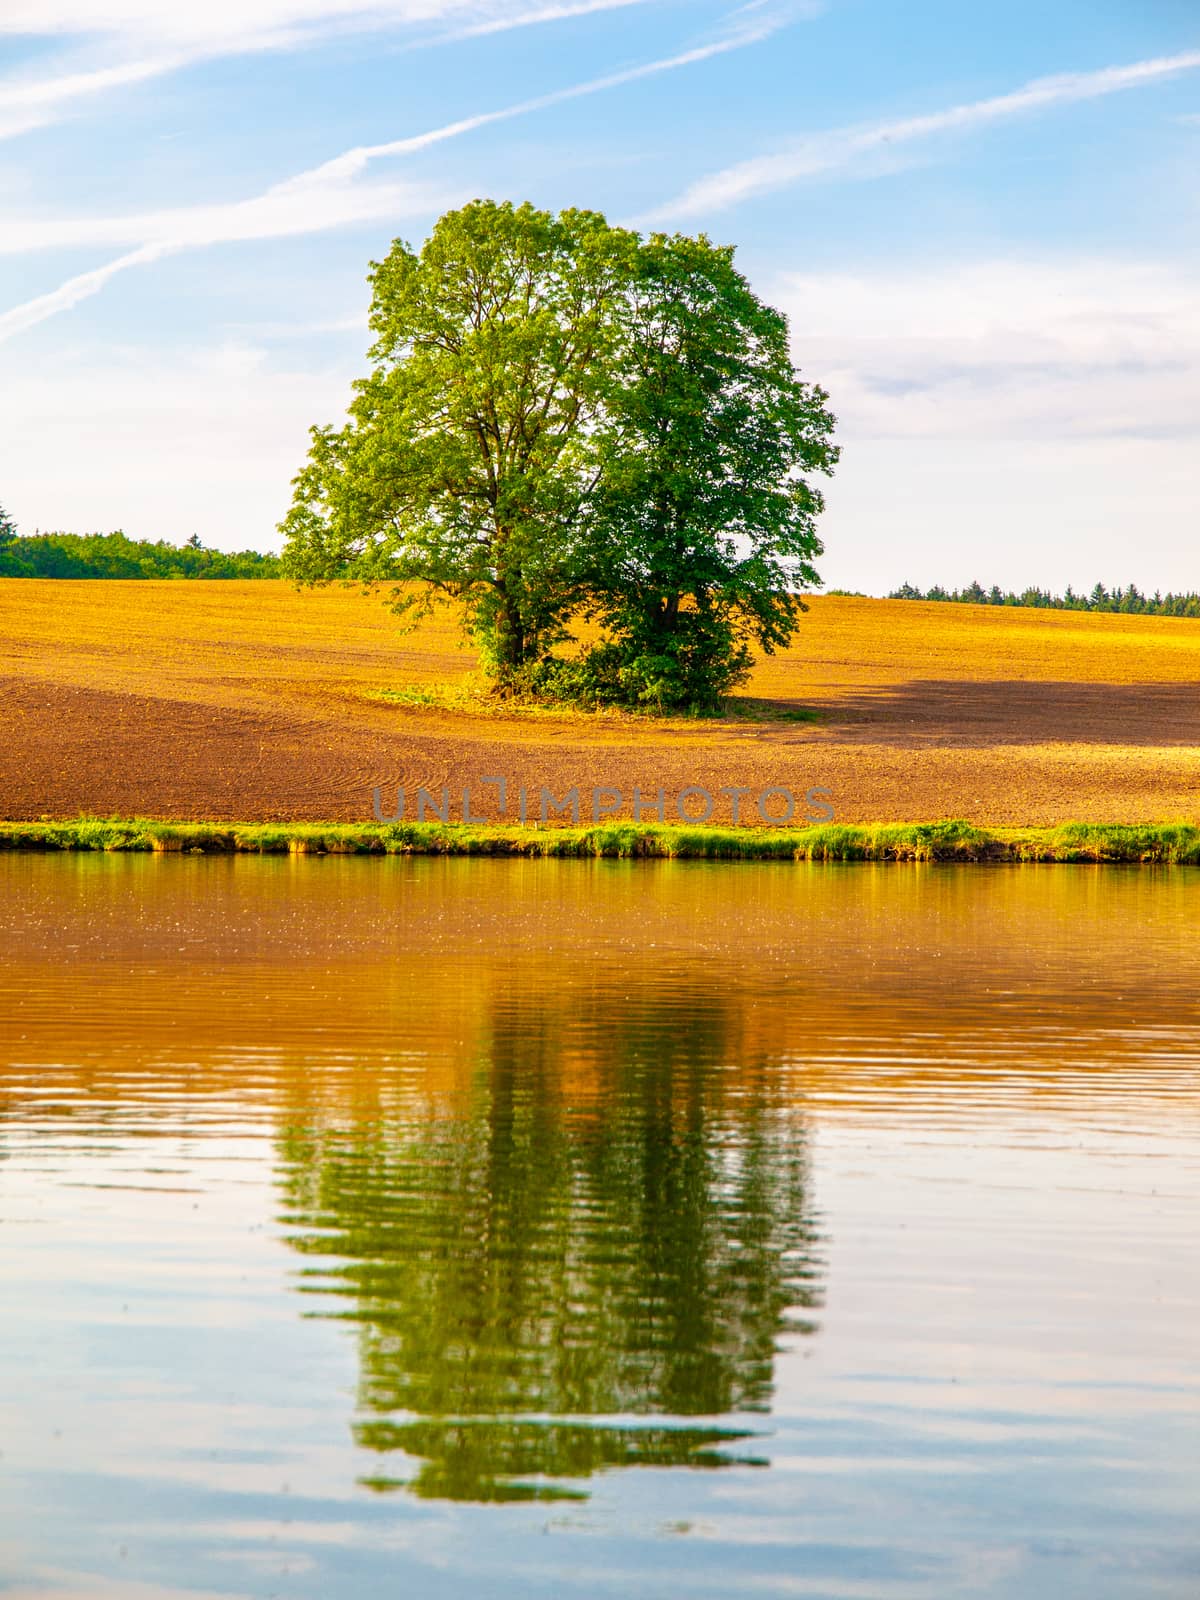 Solitary old large tree with lush green leafs on the brown spring field reflected in the water.